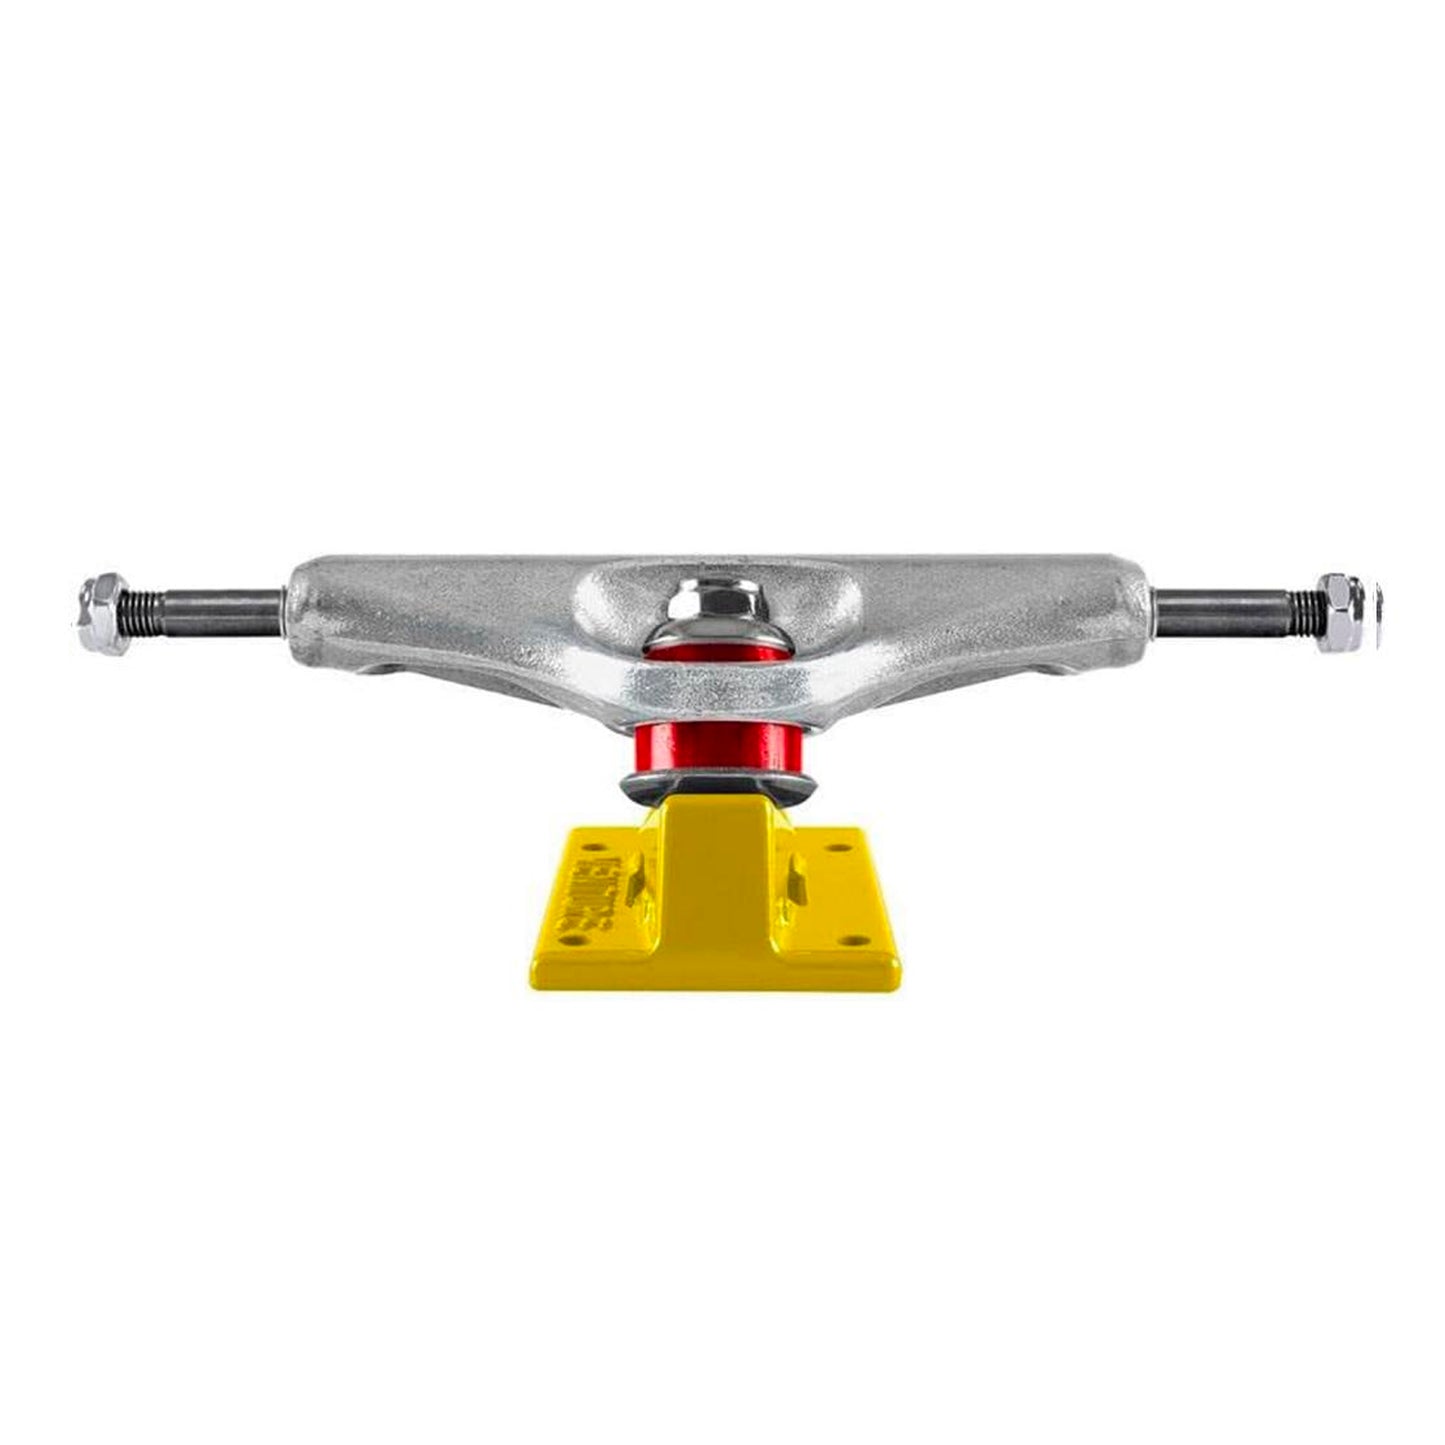 Venture - 5.0 (7.75") 92 Full Bleed Team Truck - Polished/ Yellow (Sold as a pair) - Prime Delux Store